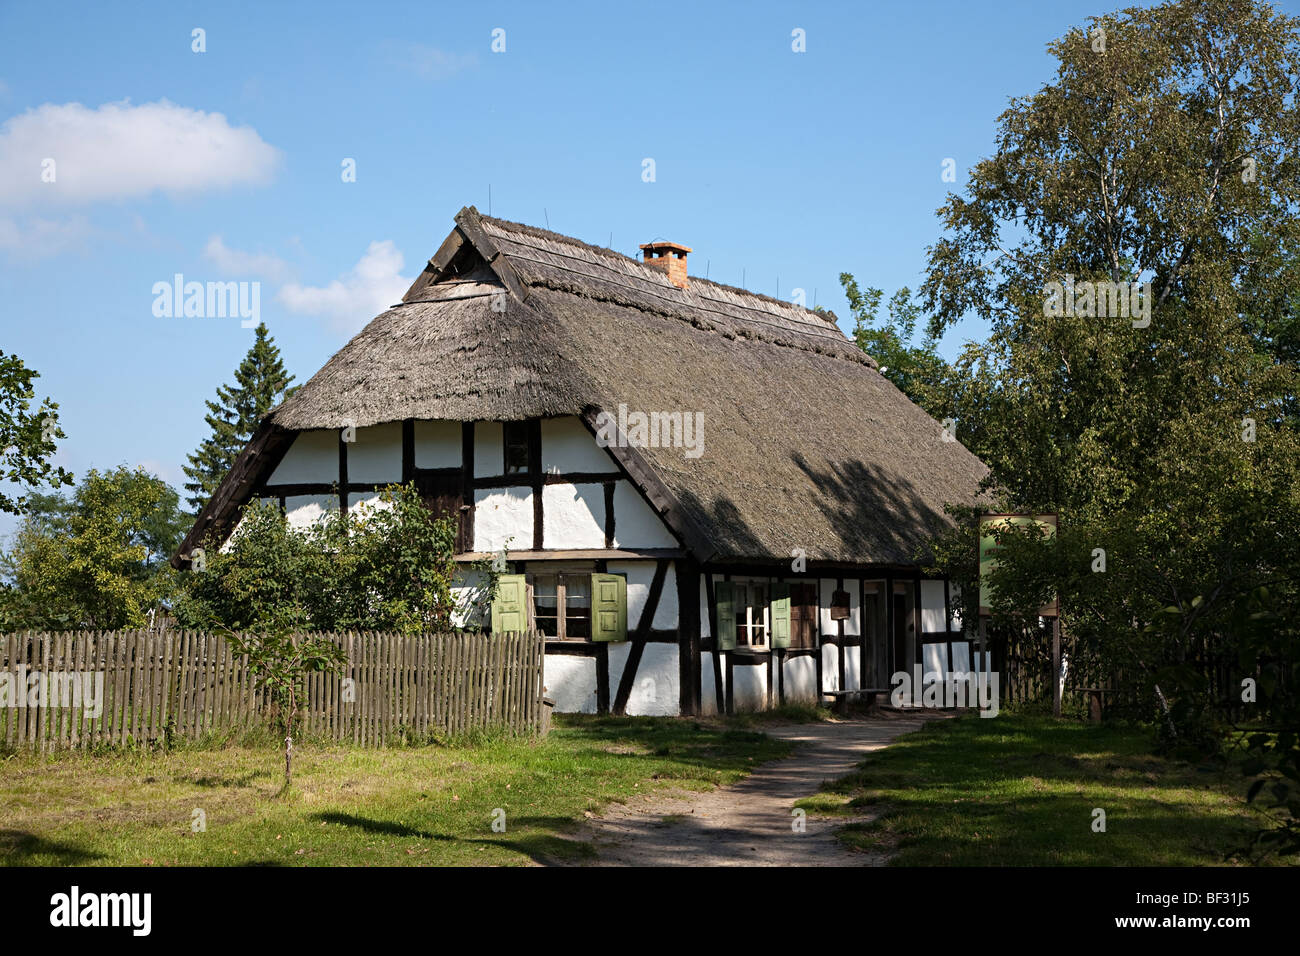 Colombages homestead chaume Kluki open air museum Pologne Banque D'Images